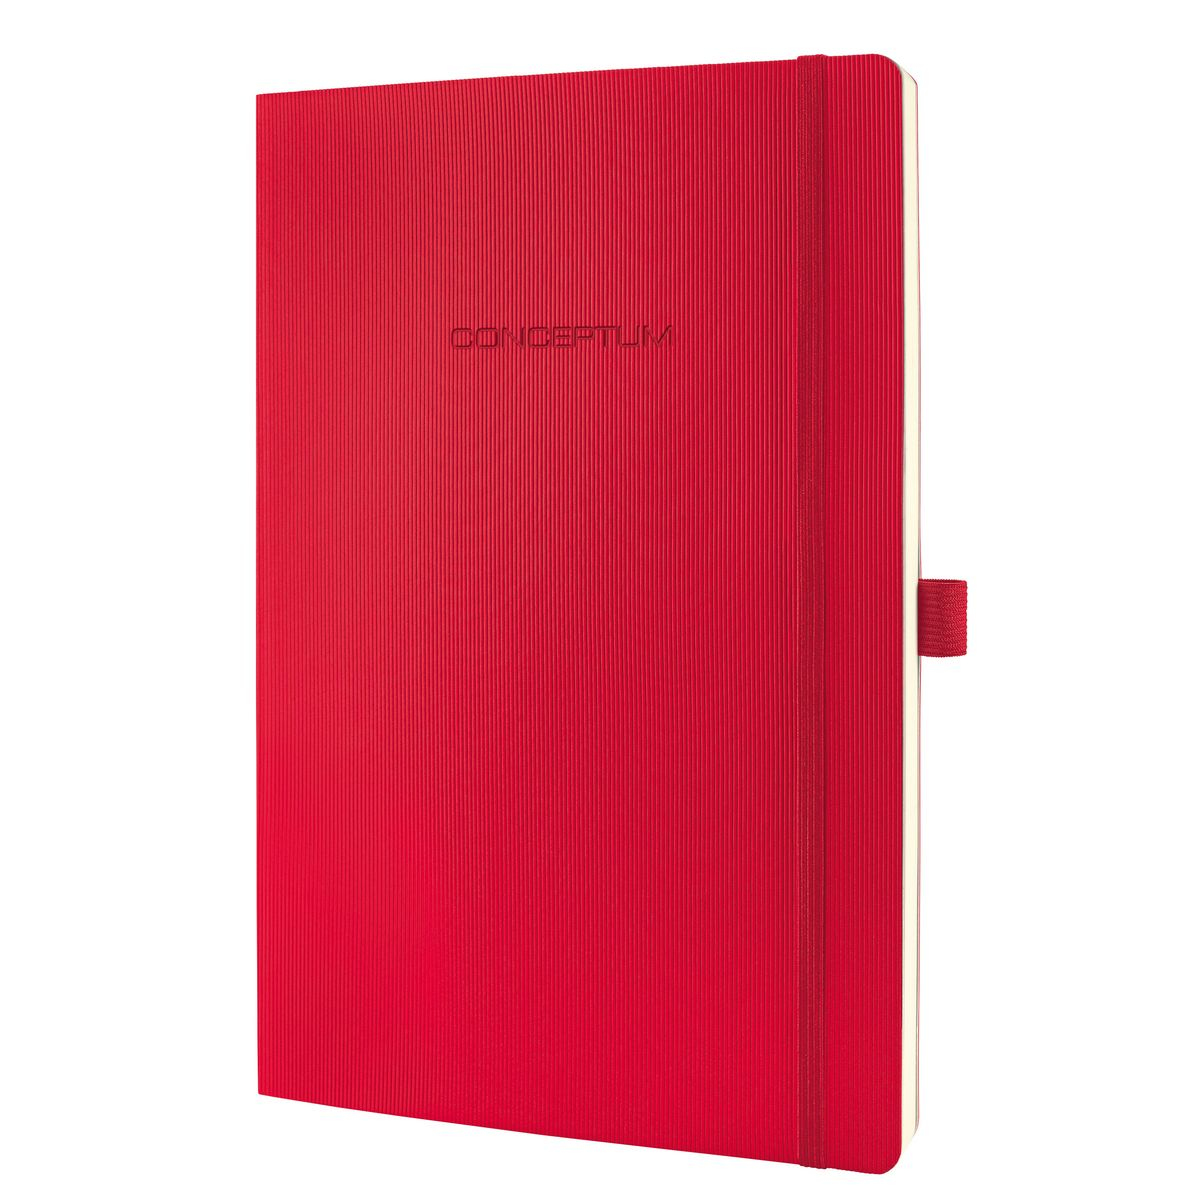 Sigel Conceptum writing notebook A4 194 sheets Red